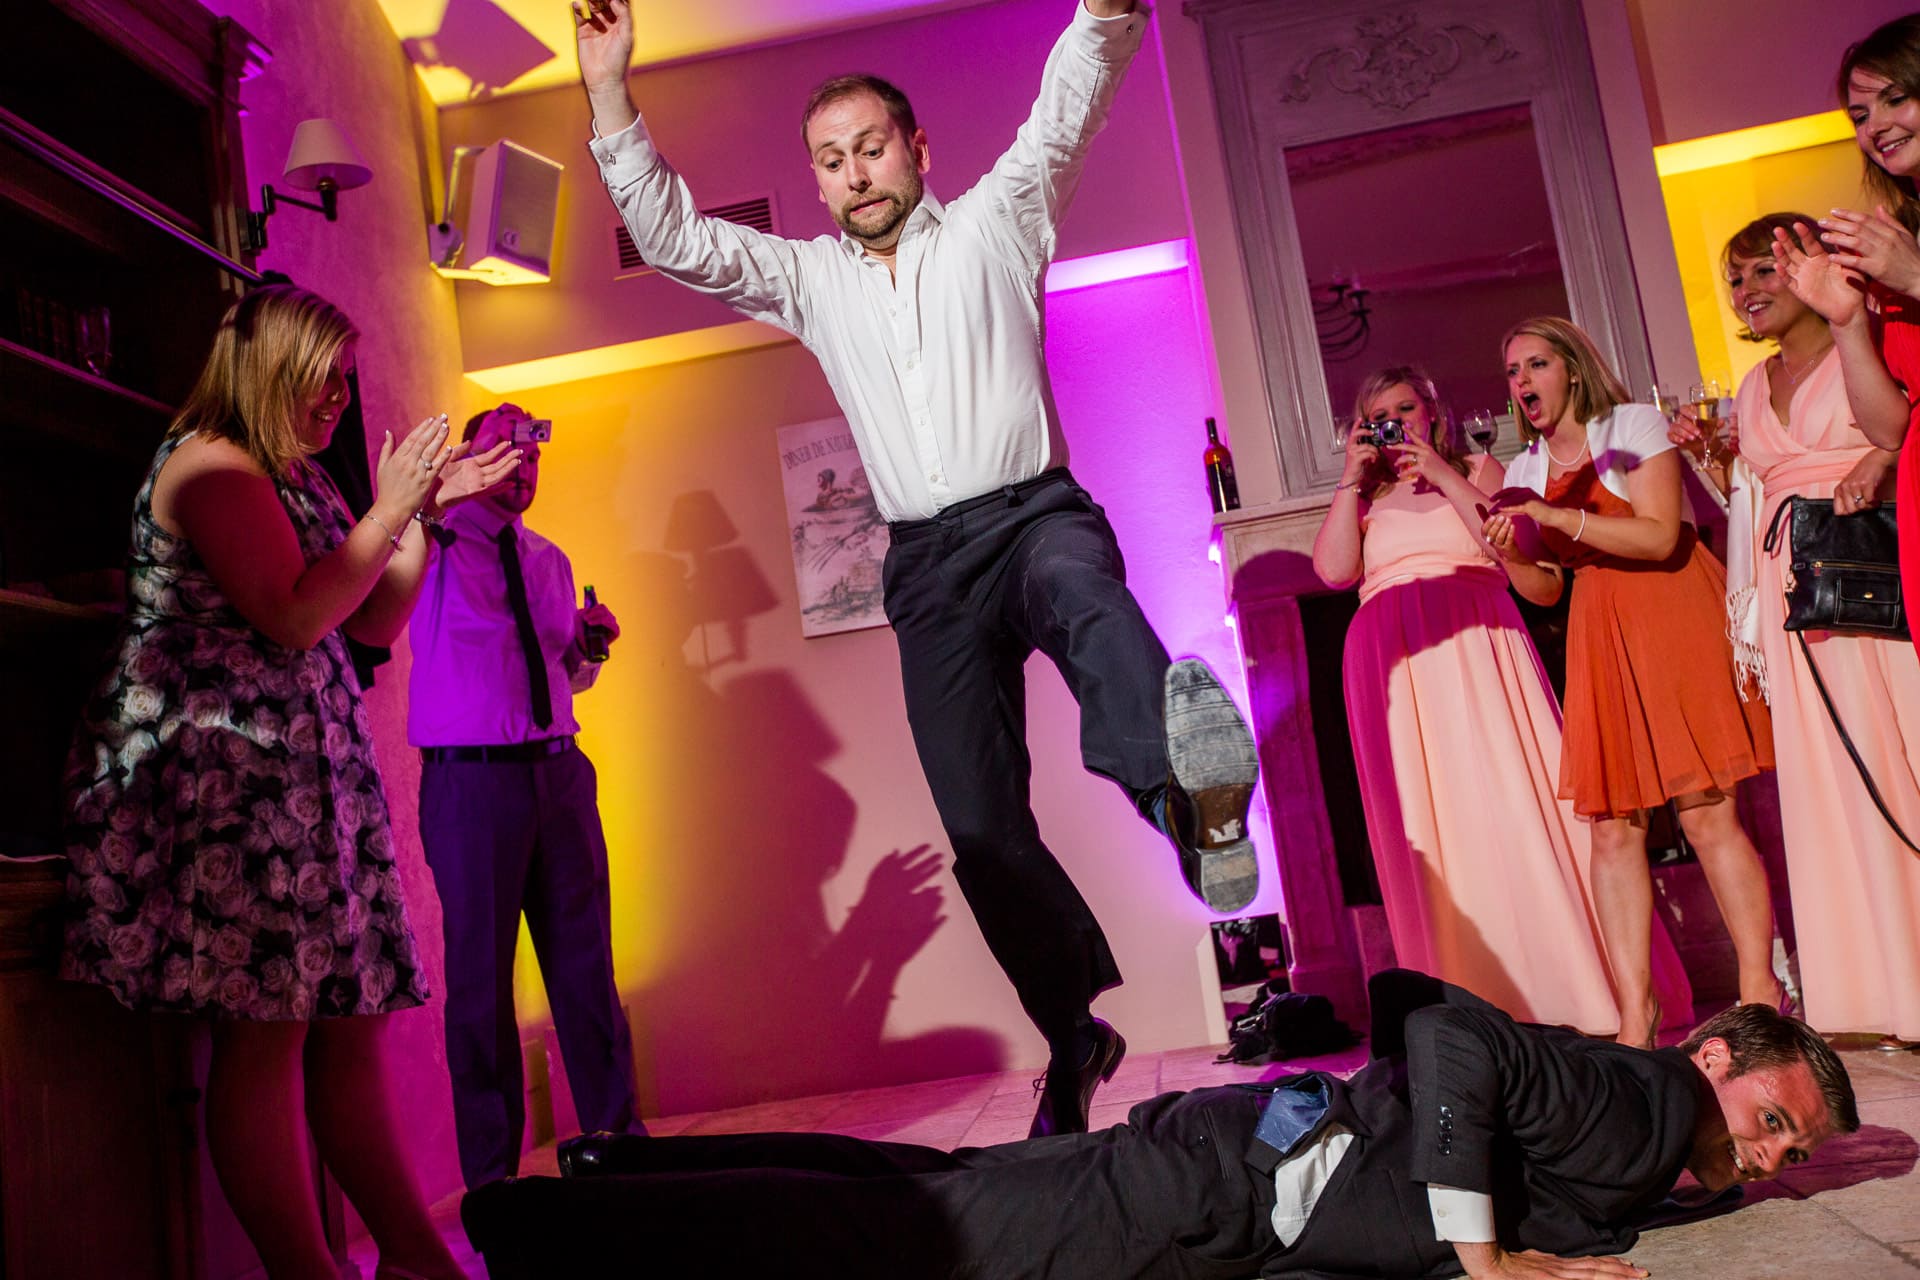 jumping over the best man